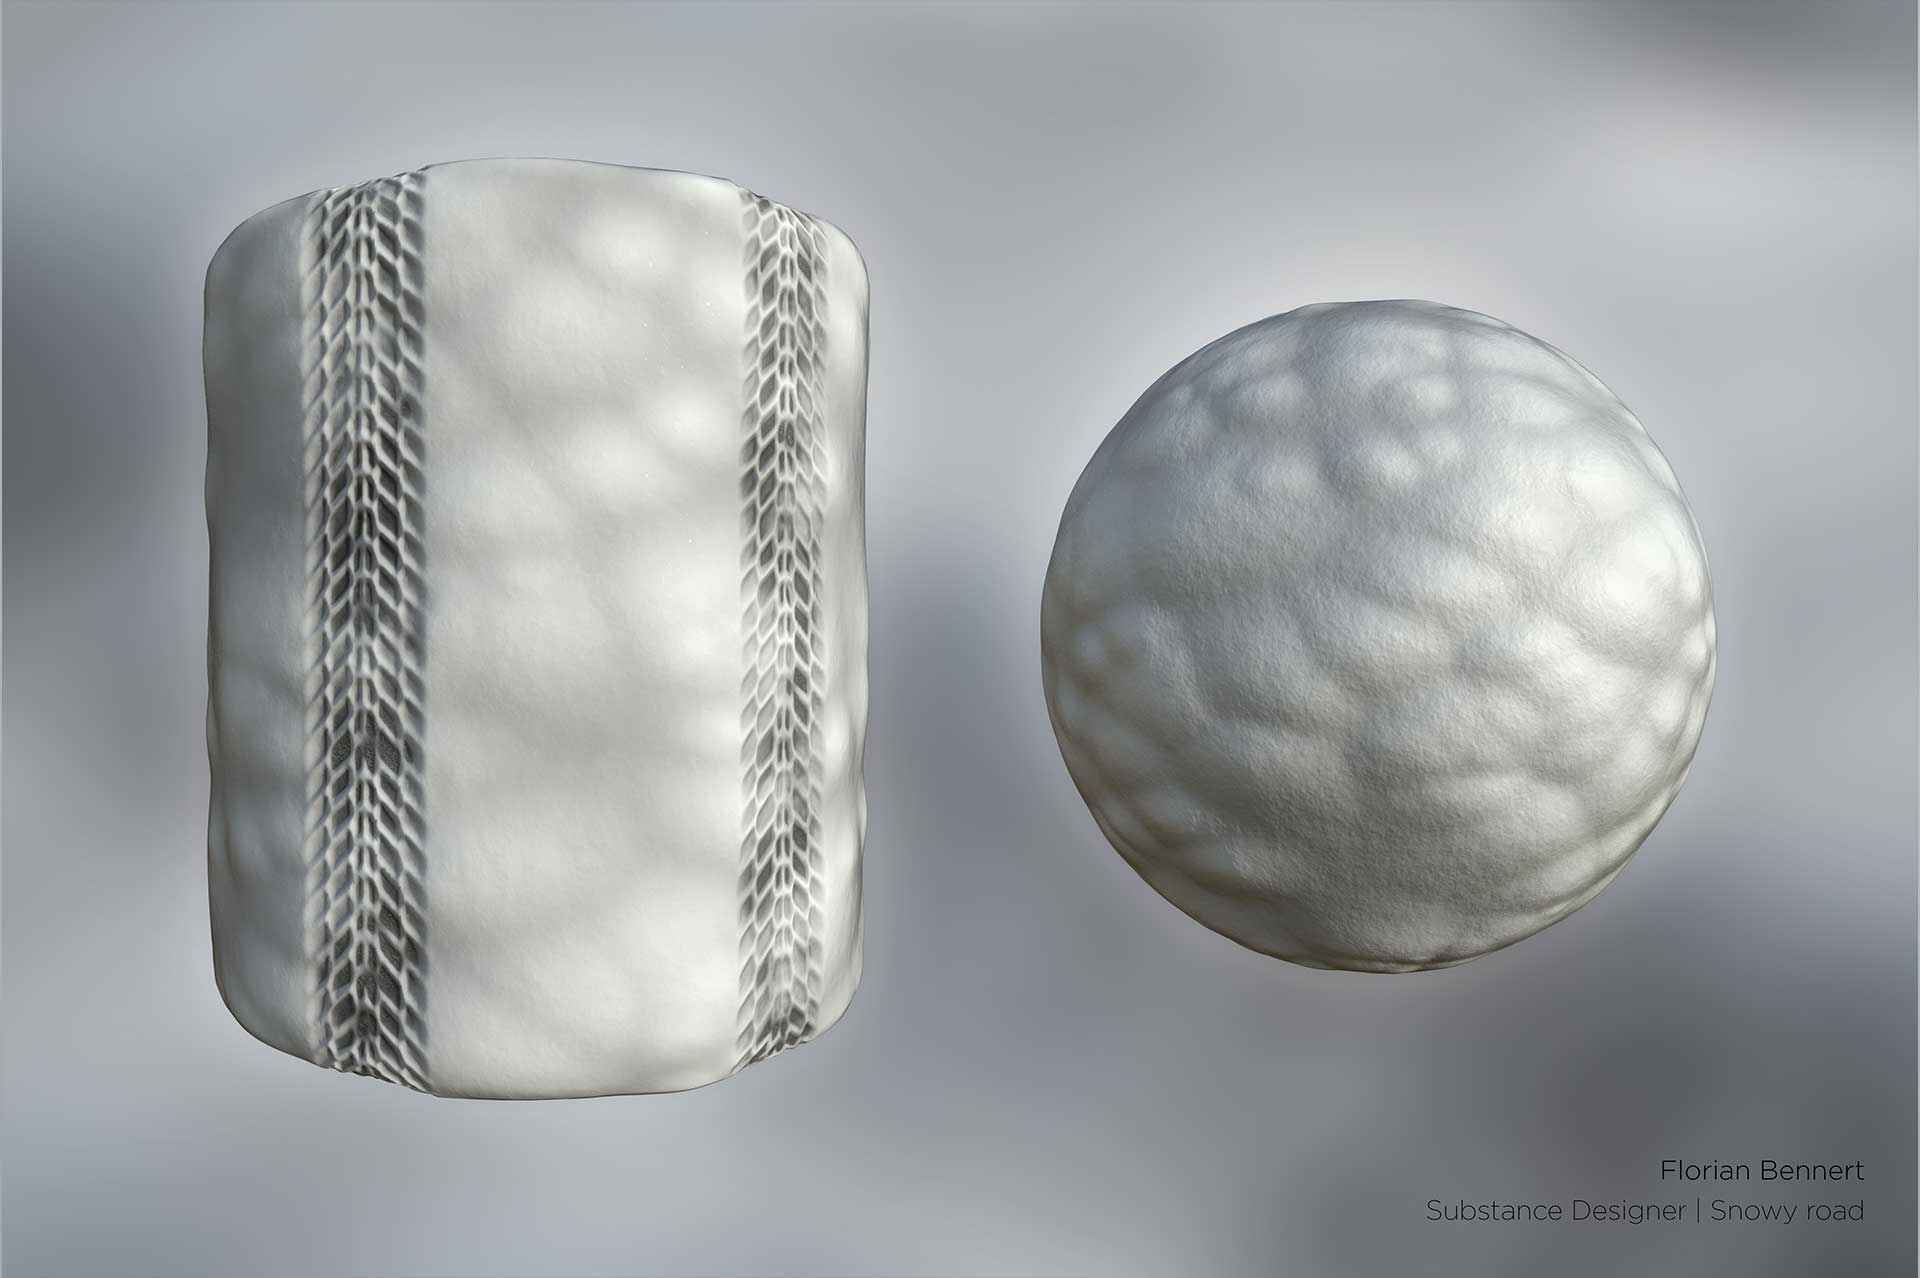 Substance Designer - Snowy road material.